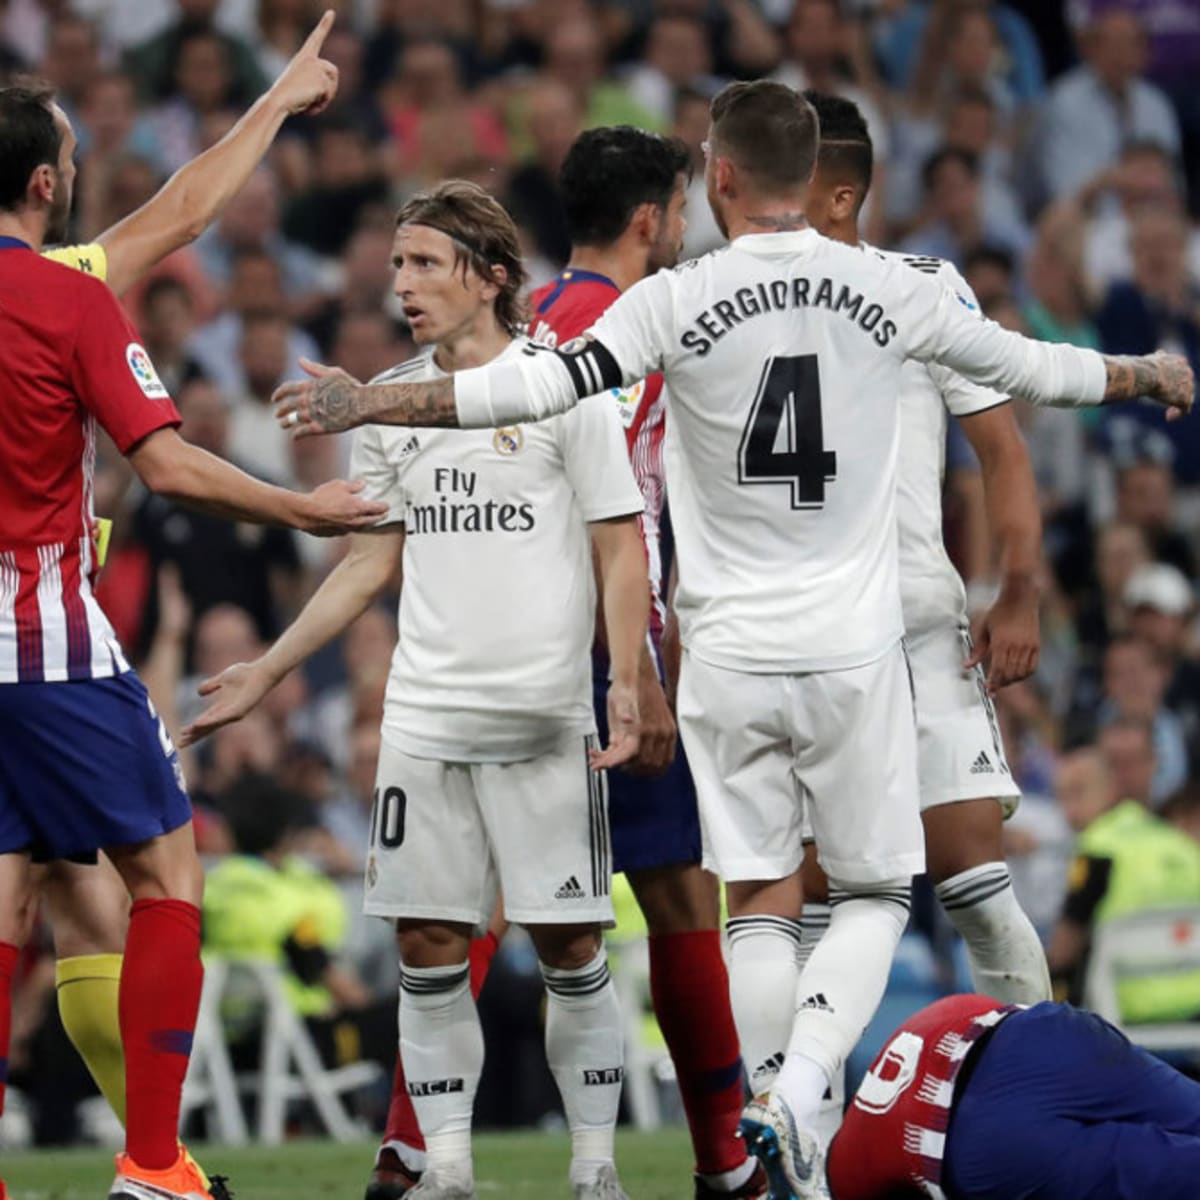 Atletico Madrid vs Real Madrid live stream Watch online, TV, time